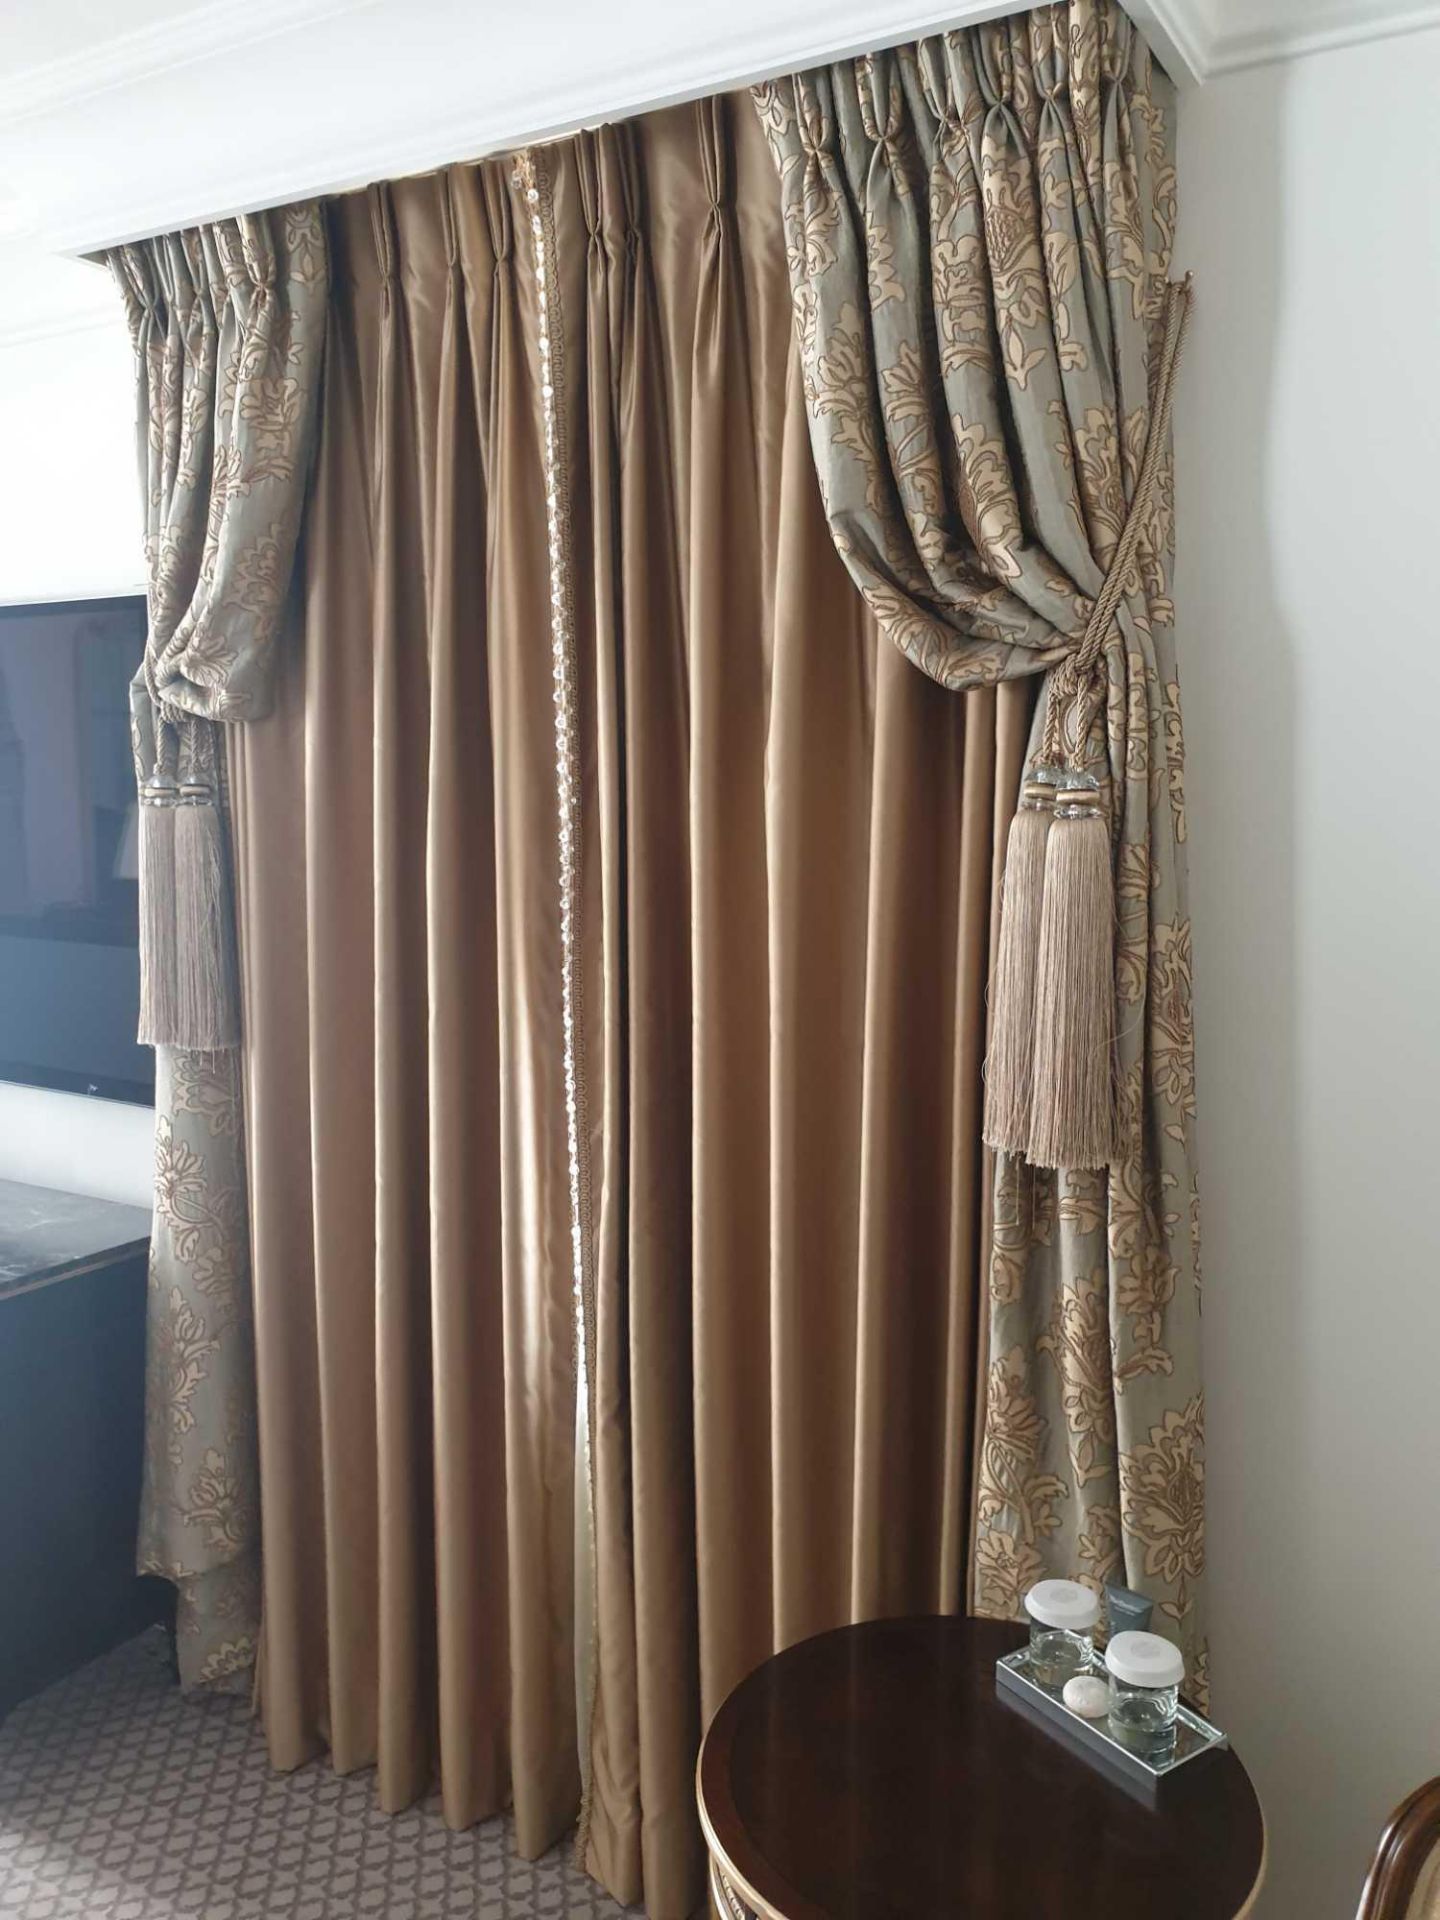 A Pair Of Gold Silk Drapes With Crystal Bead Trim And Jabots With Tie Backs Span 150 x 260cm (Room